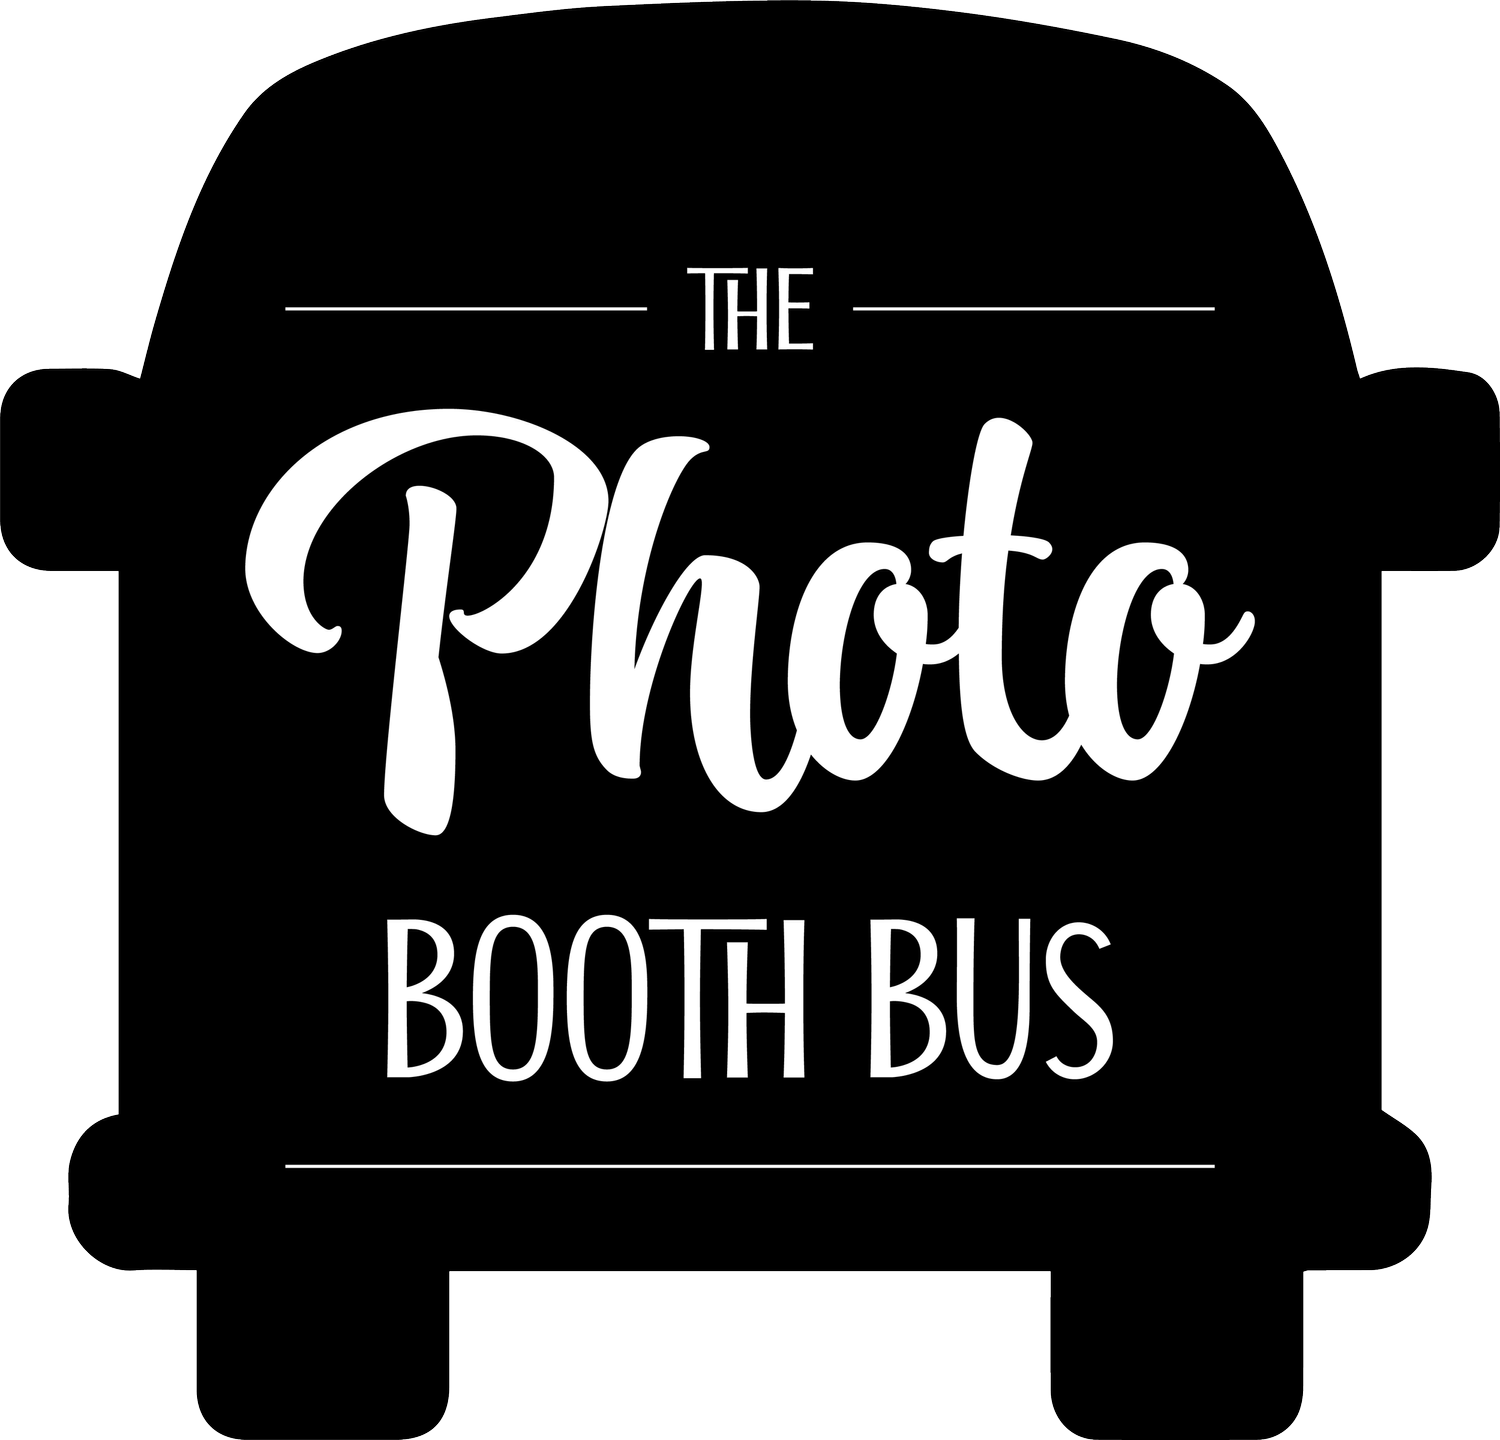 Photo Booth Bus